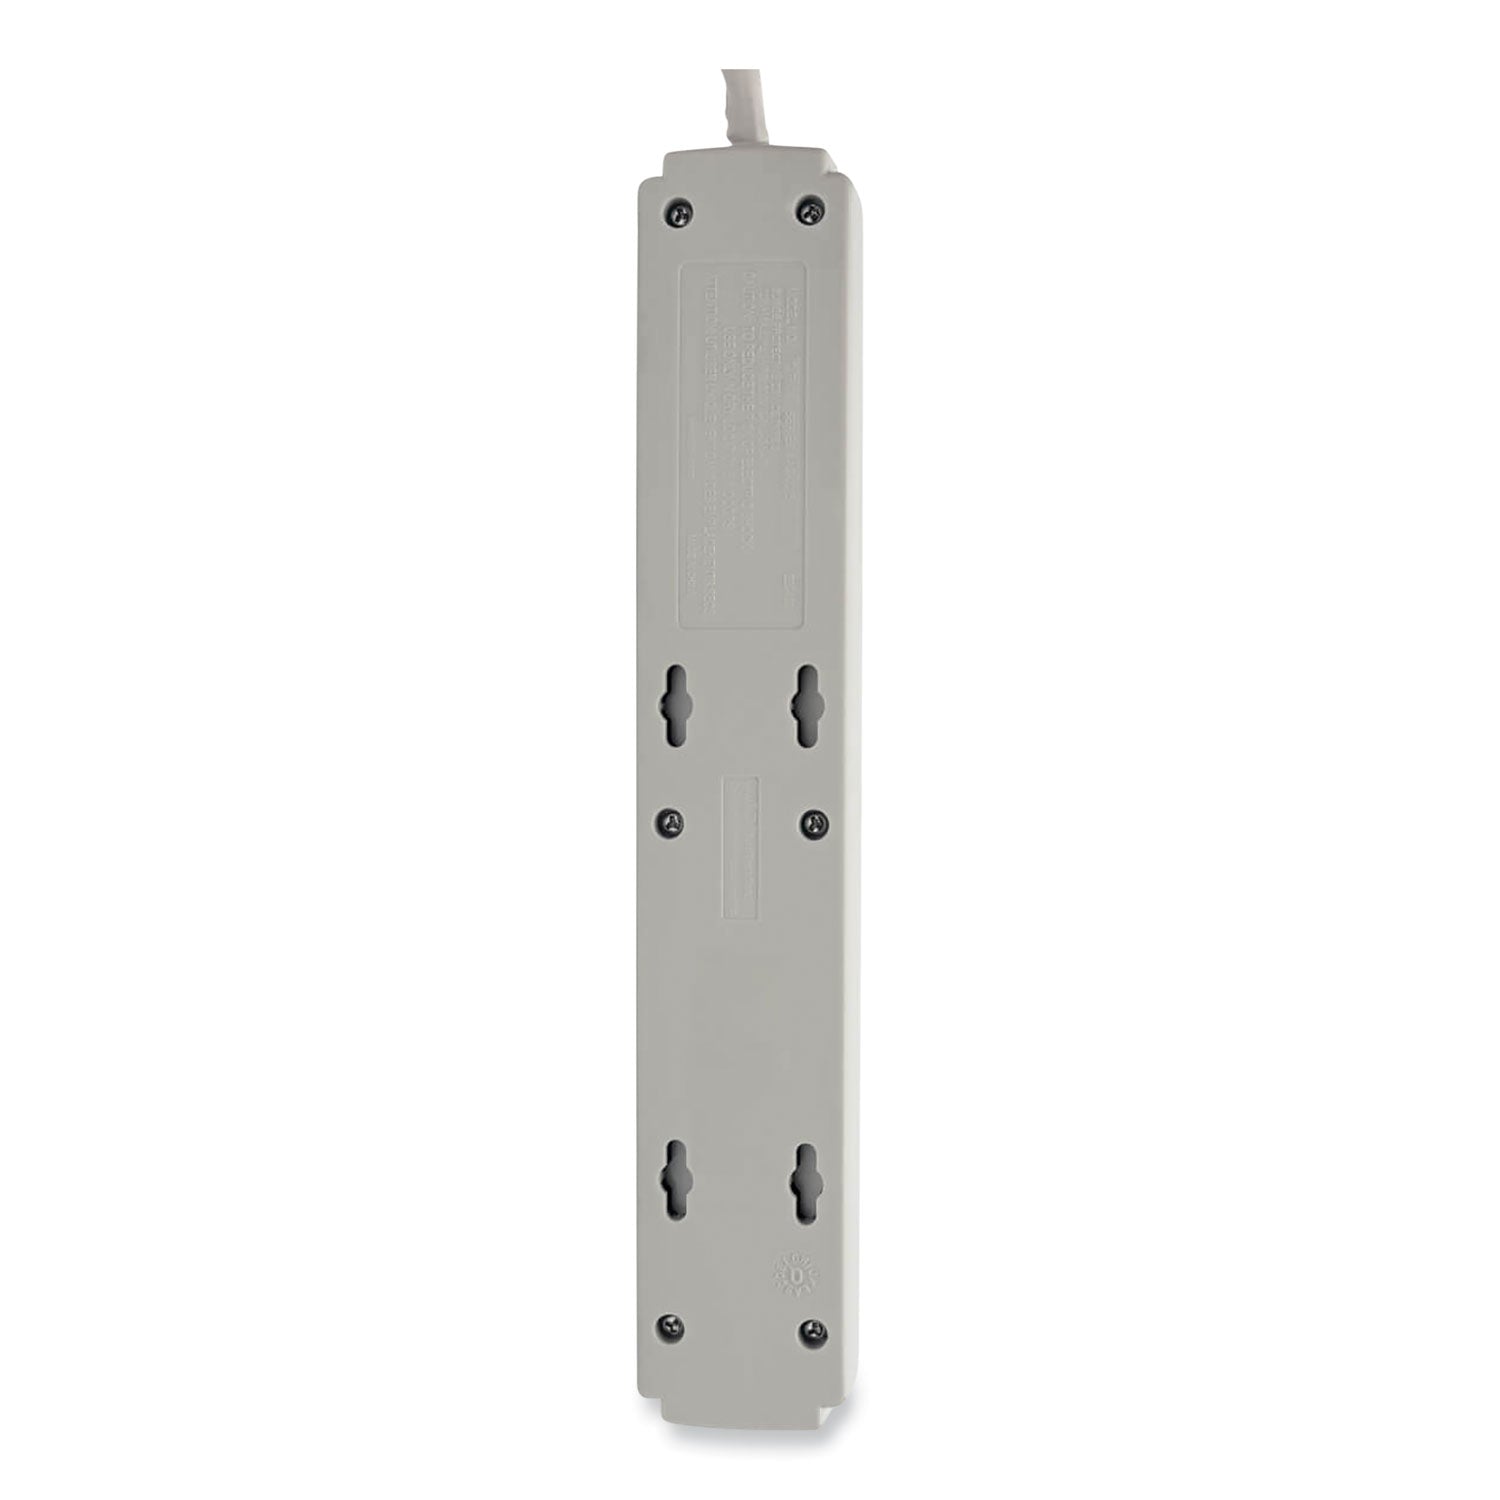 Protect It! Surge Protector, 6 AC Outlets, 4 ft Cord, 790 J, Light Gray - 